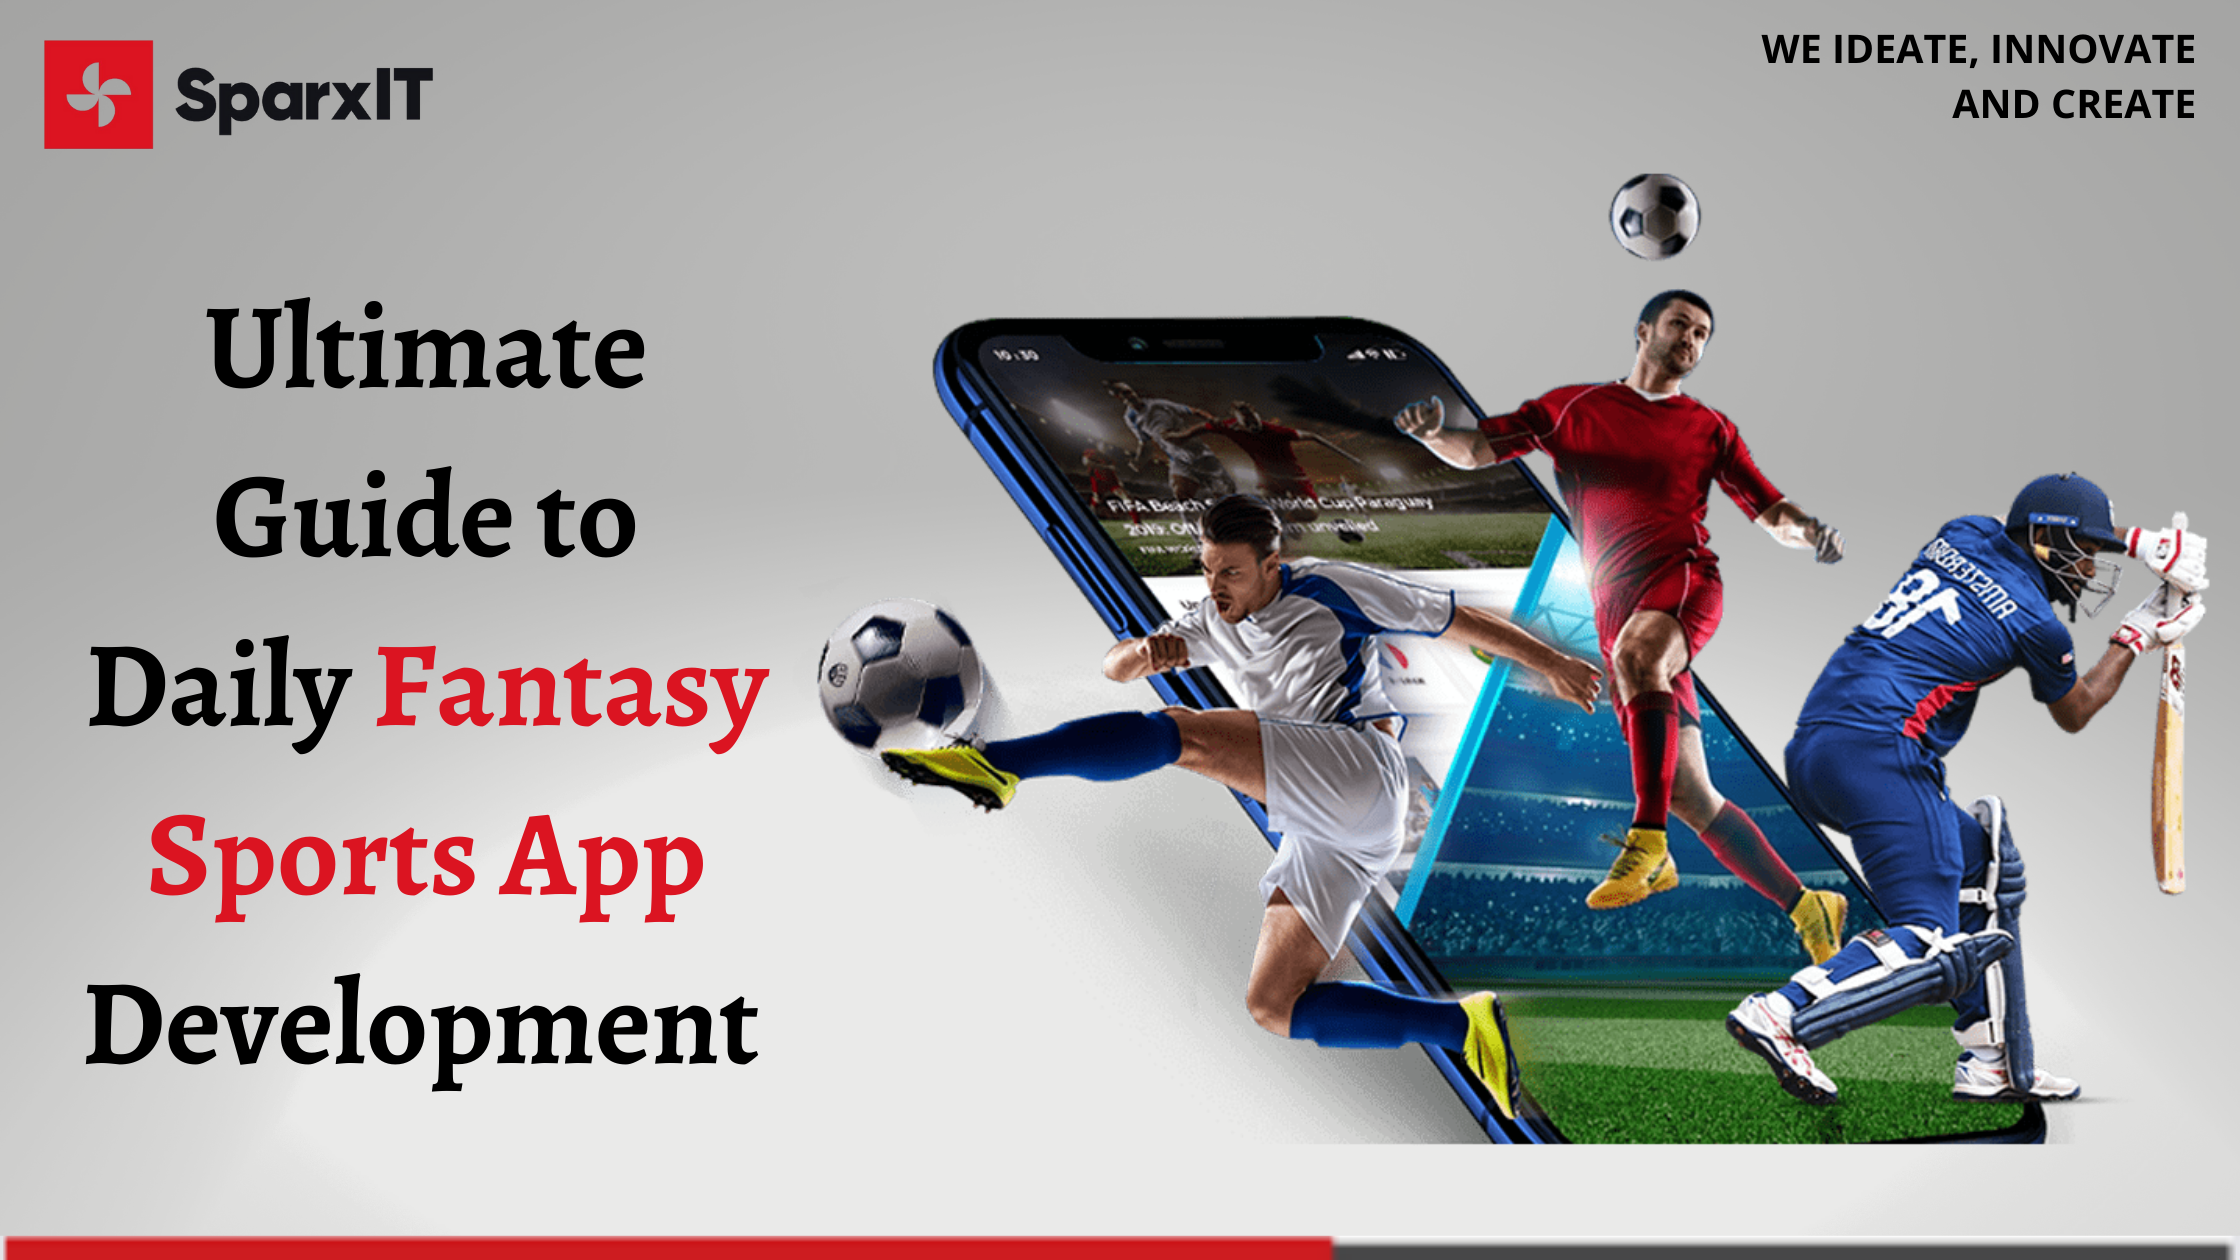 Complete Guide to Daily Fantasy Sports App Development